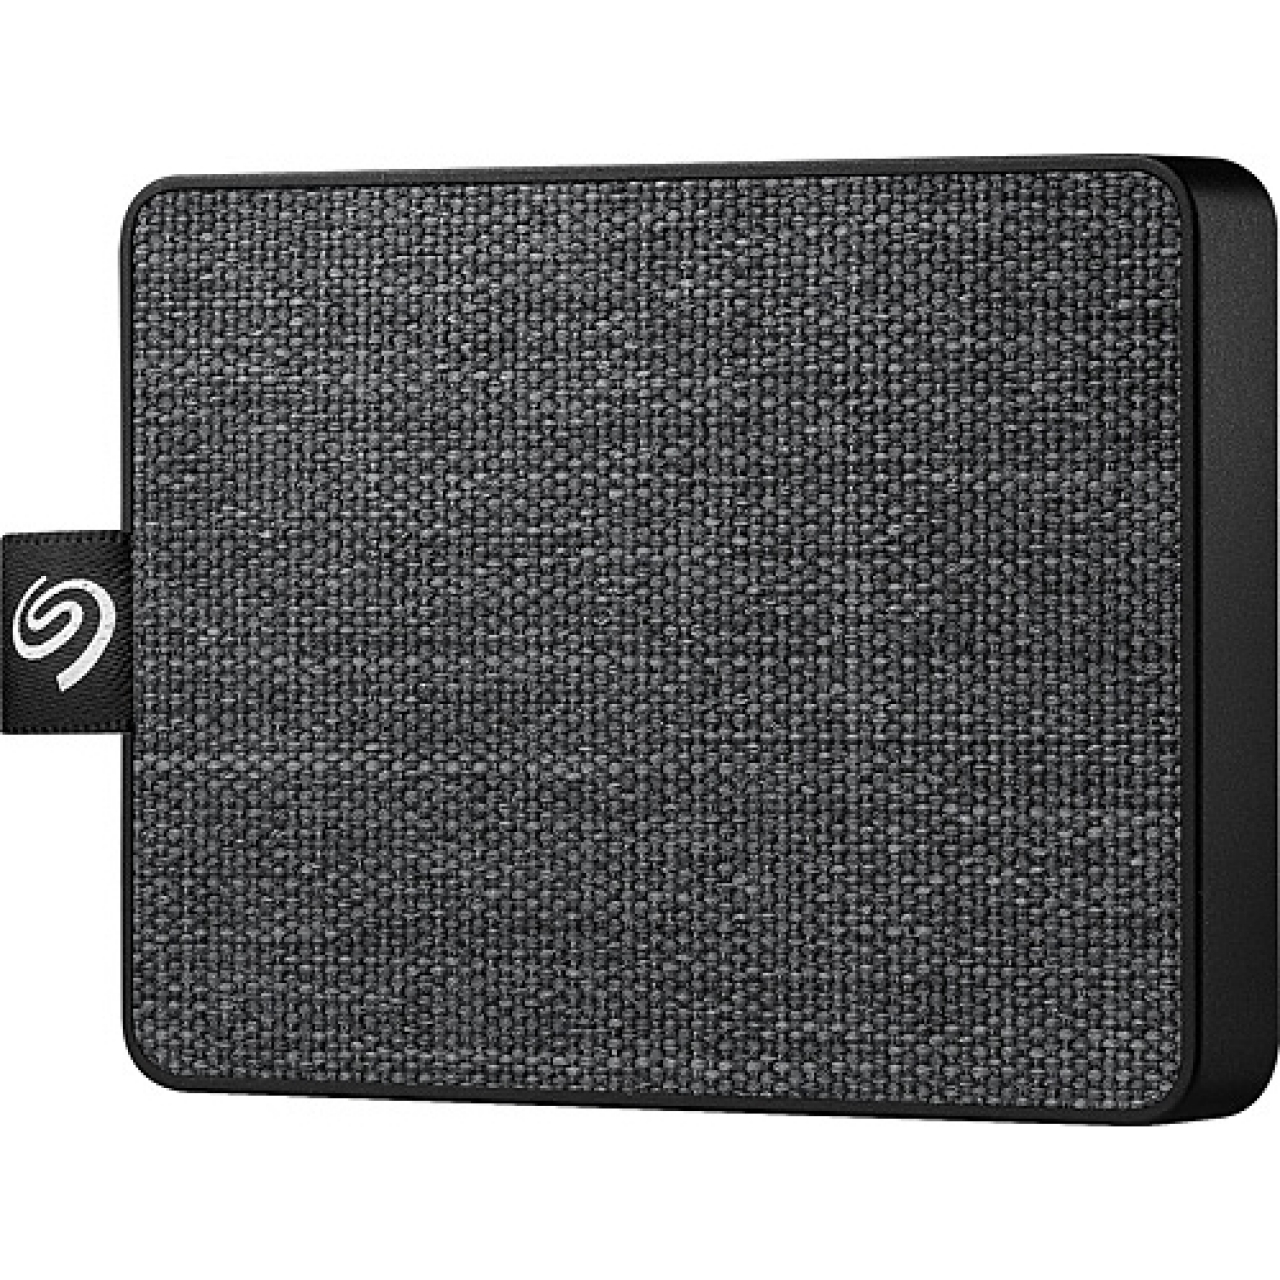 SEAGATE 500GB 2.5" EXPANSION SSD STJE500400 USB 3.0 HARİCİ DİSK